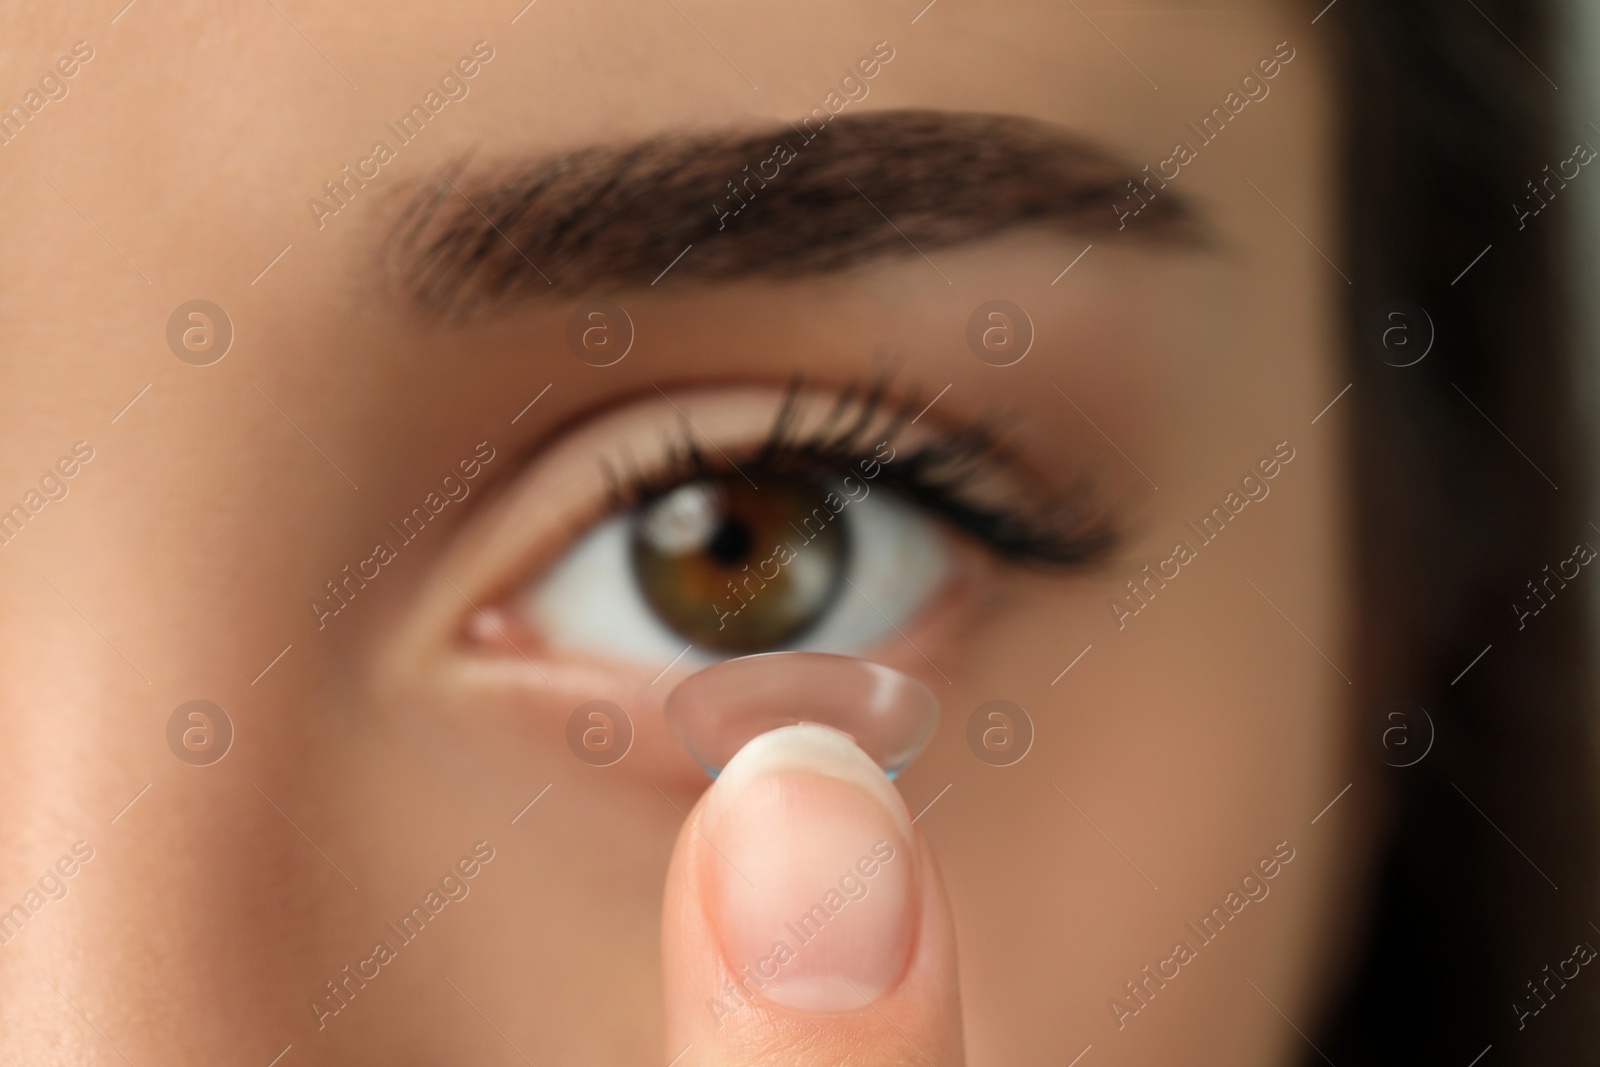 Photo of Woman putting contact lens in her eye, closeup view